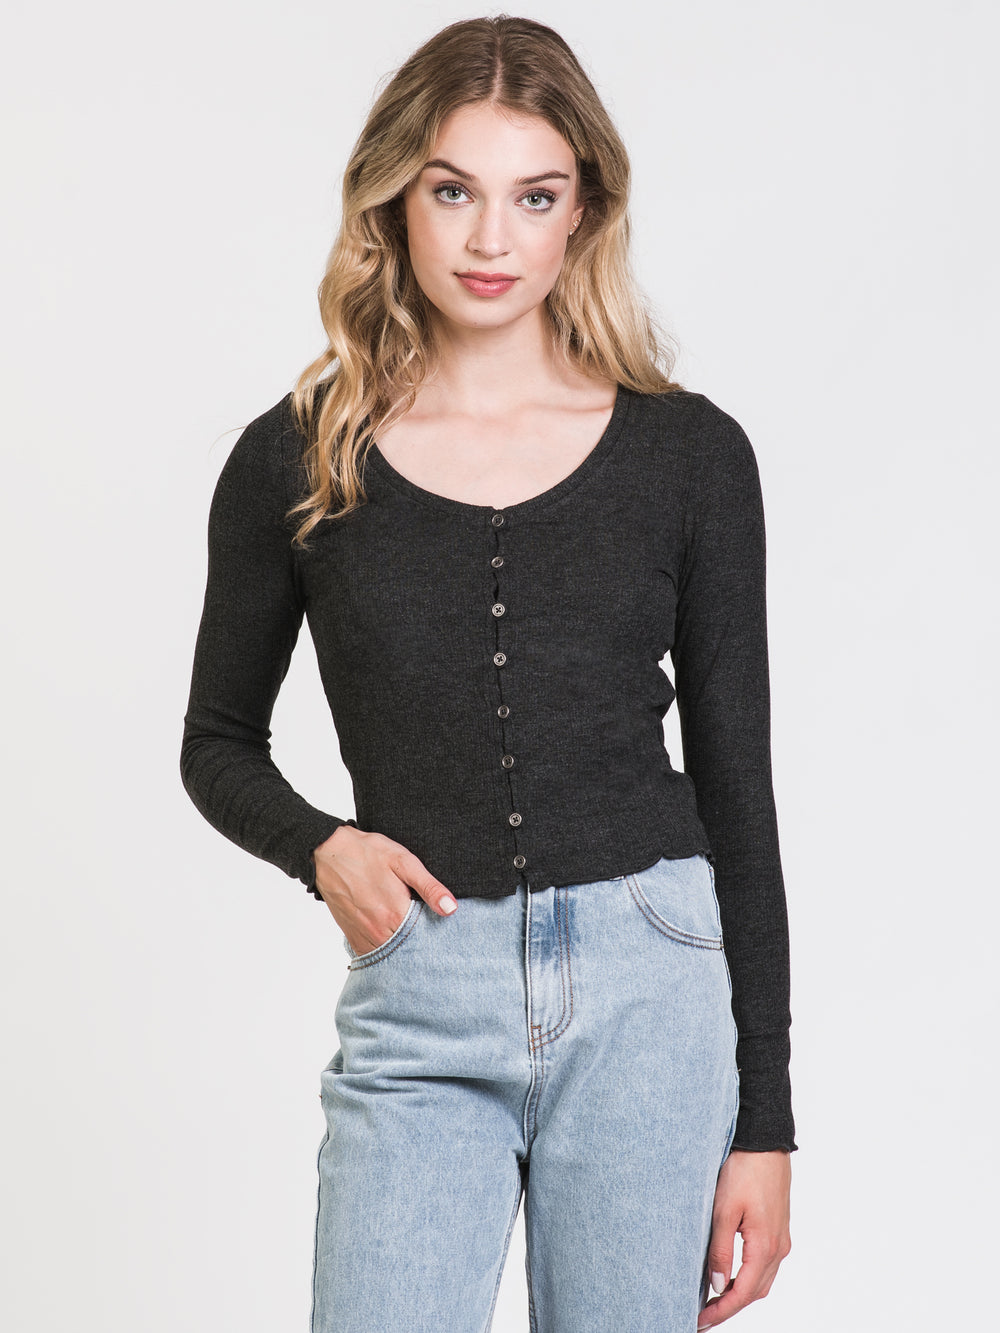 HARLOW HELEN LONG SLEEVE BUTTON UP MIX - CLEARANCE